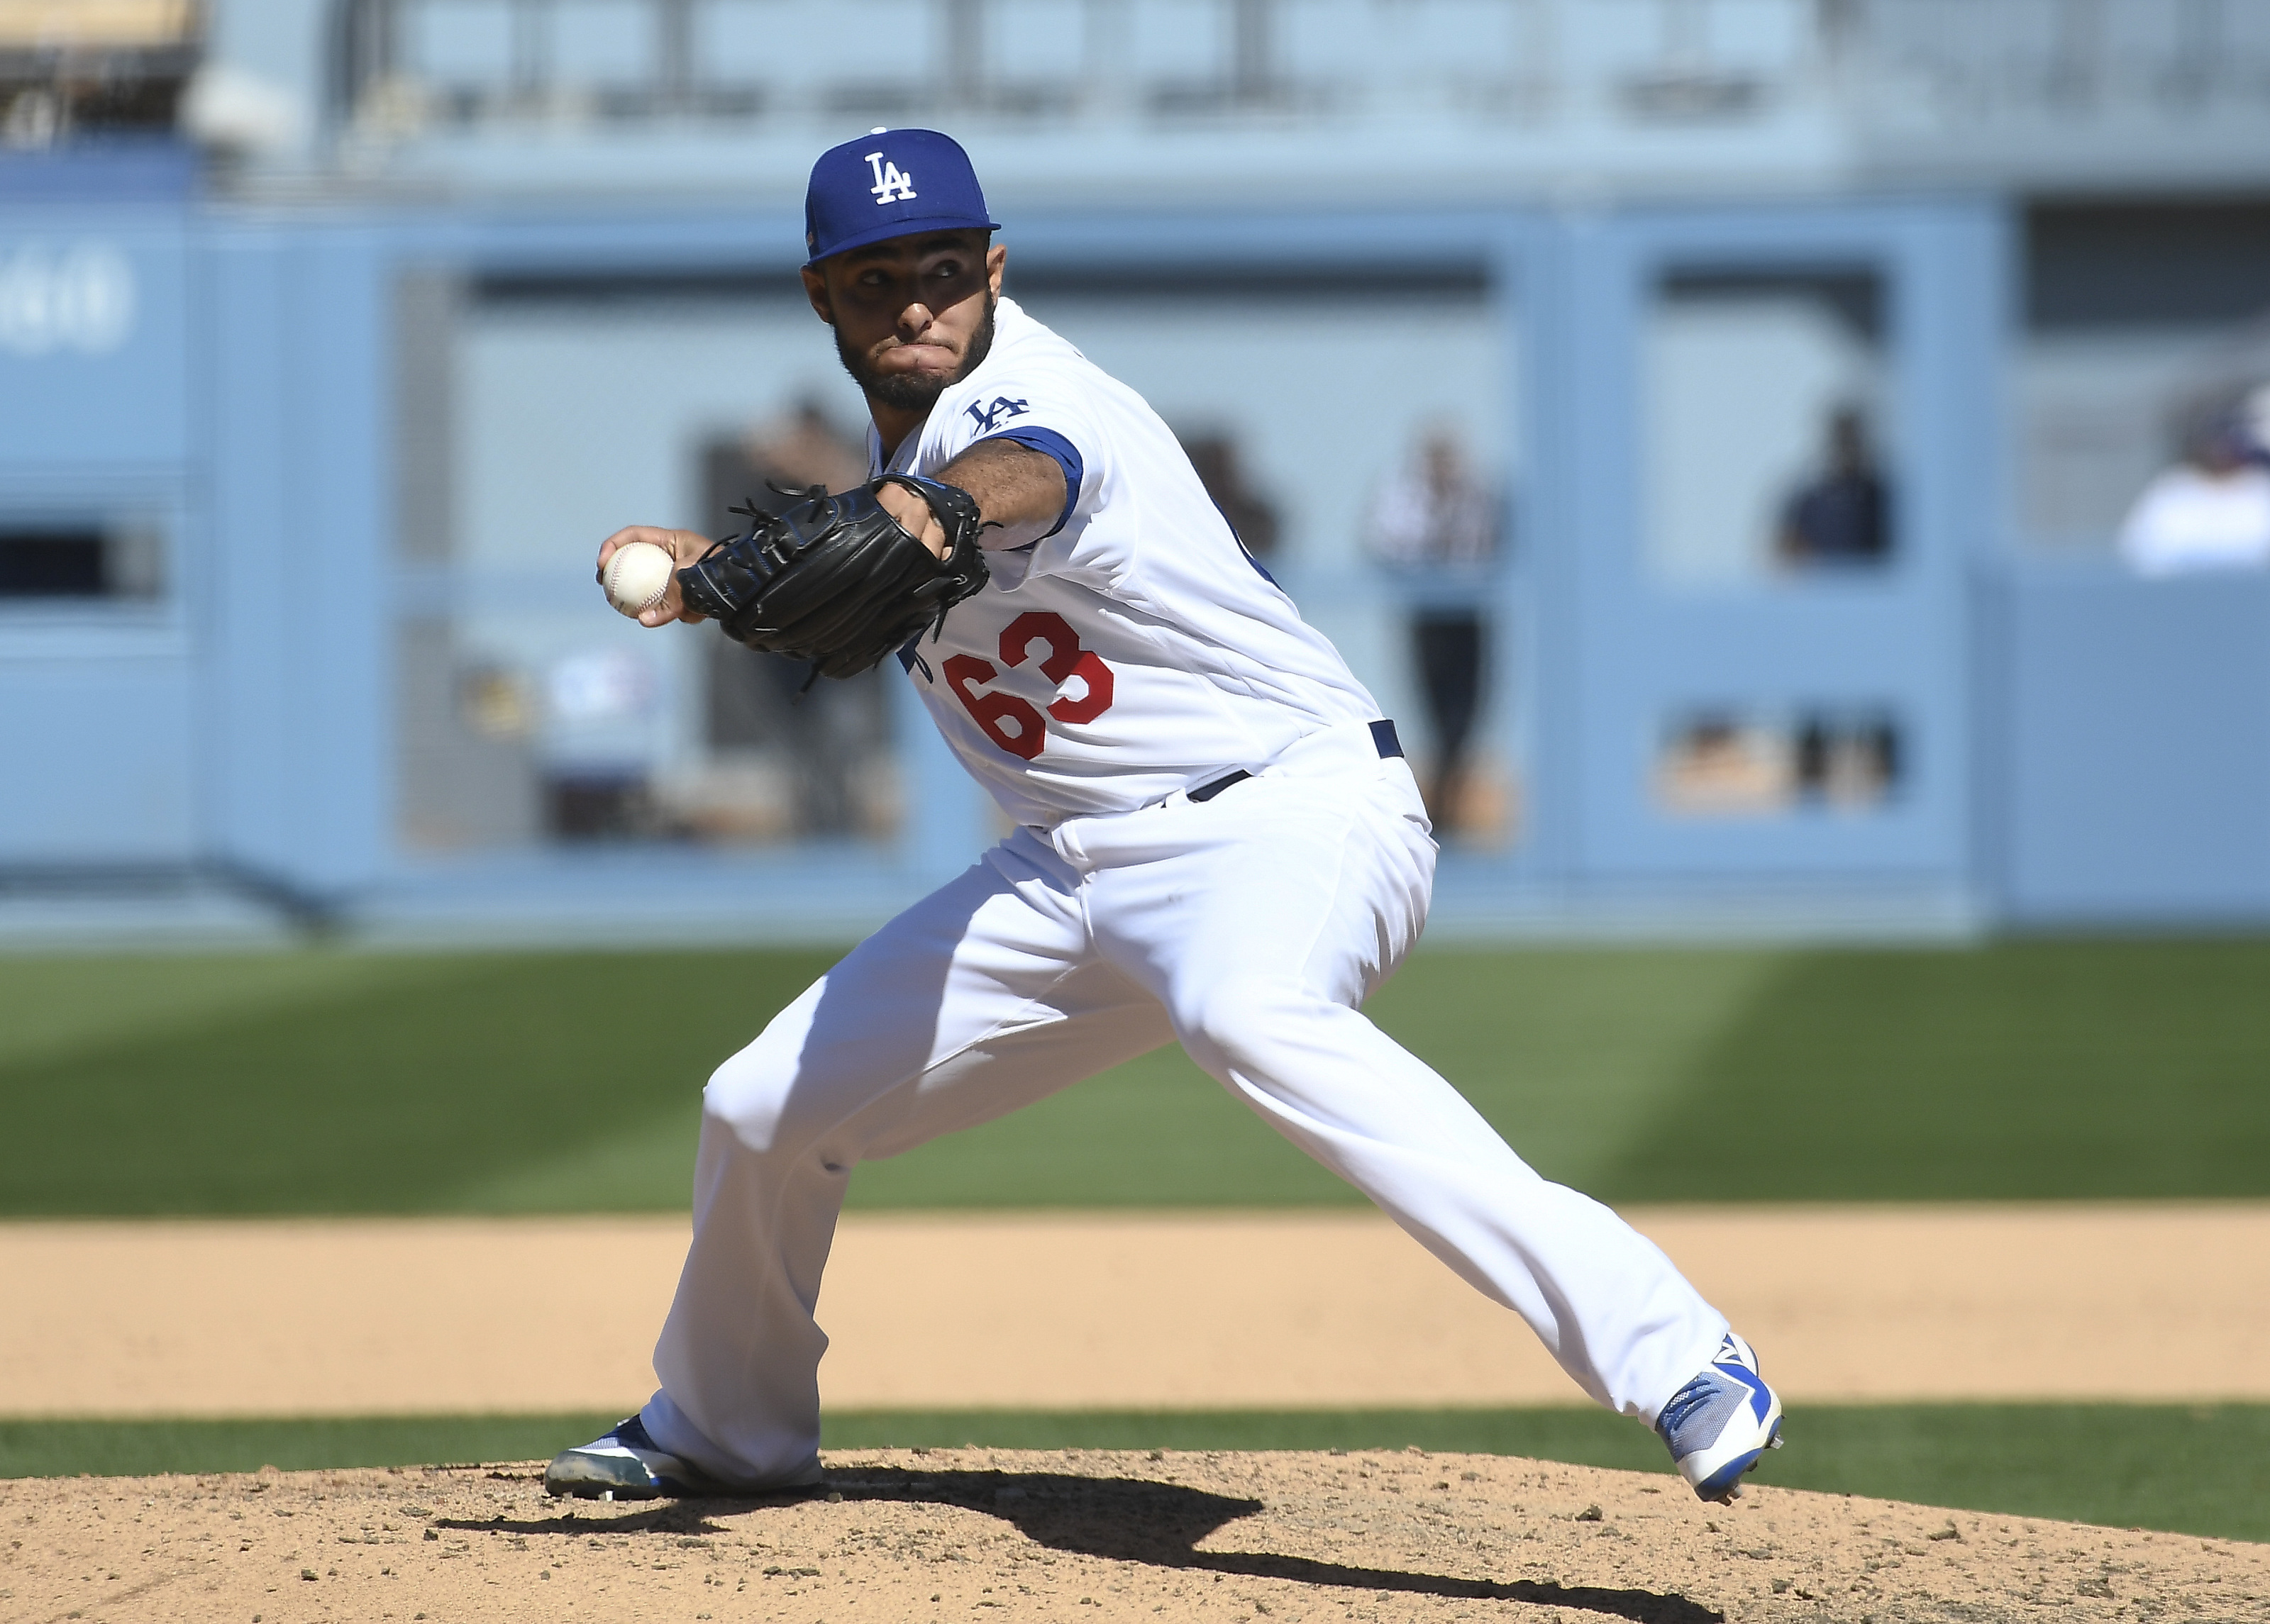 Dodgers' bullpen is among MLB's worst, most perplexing